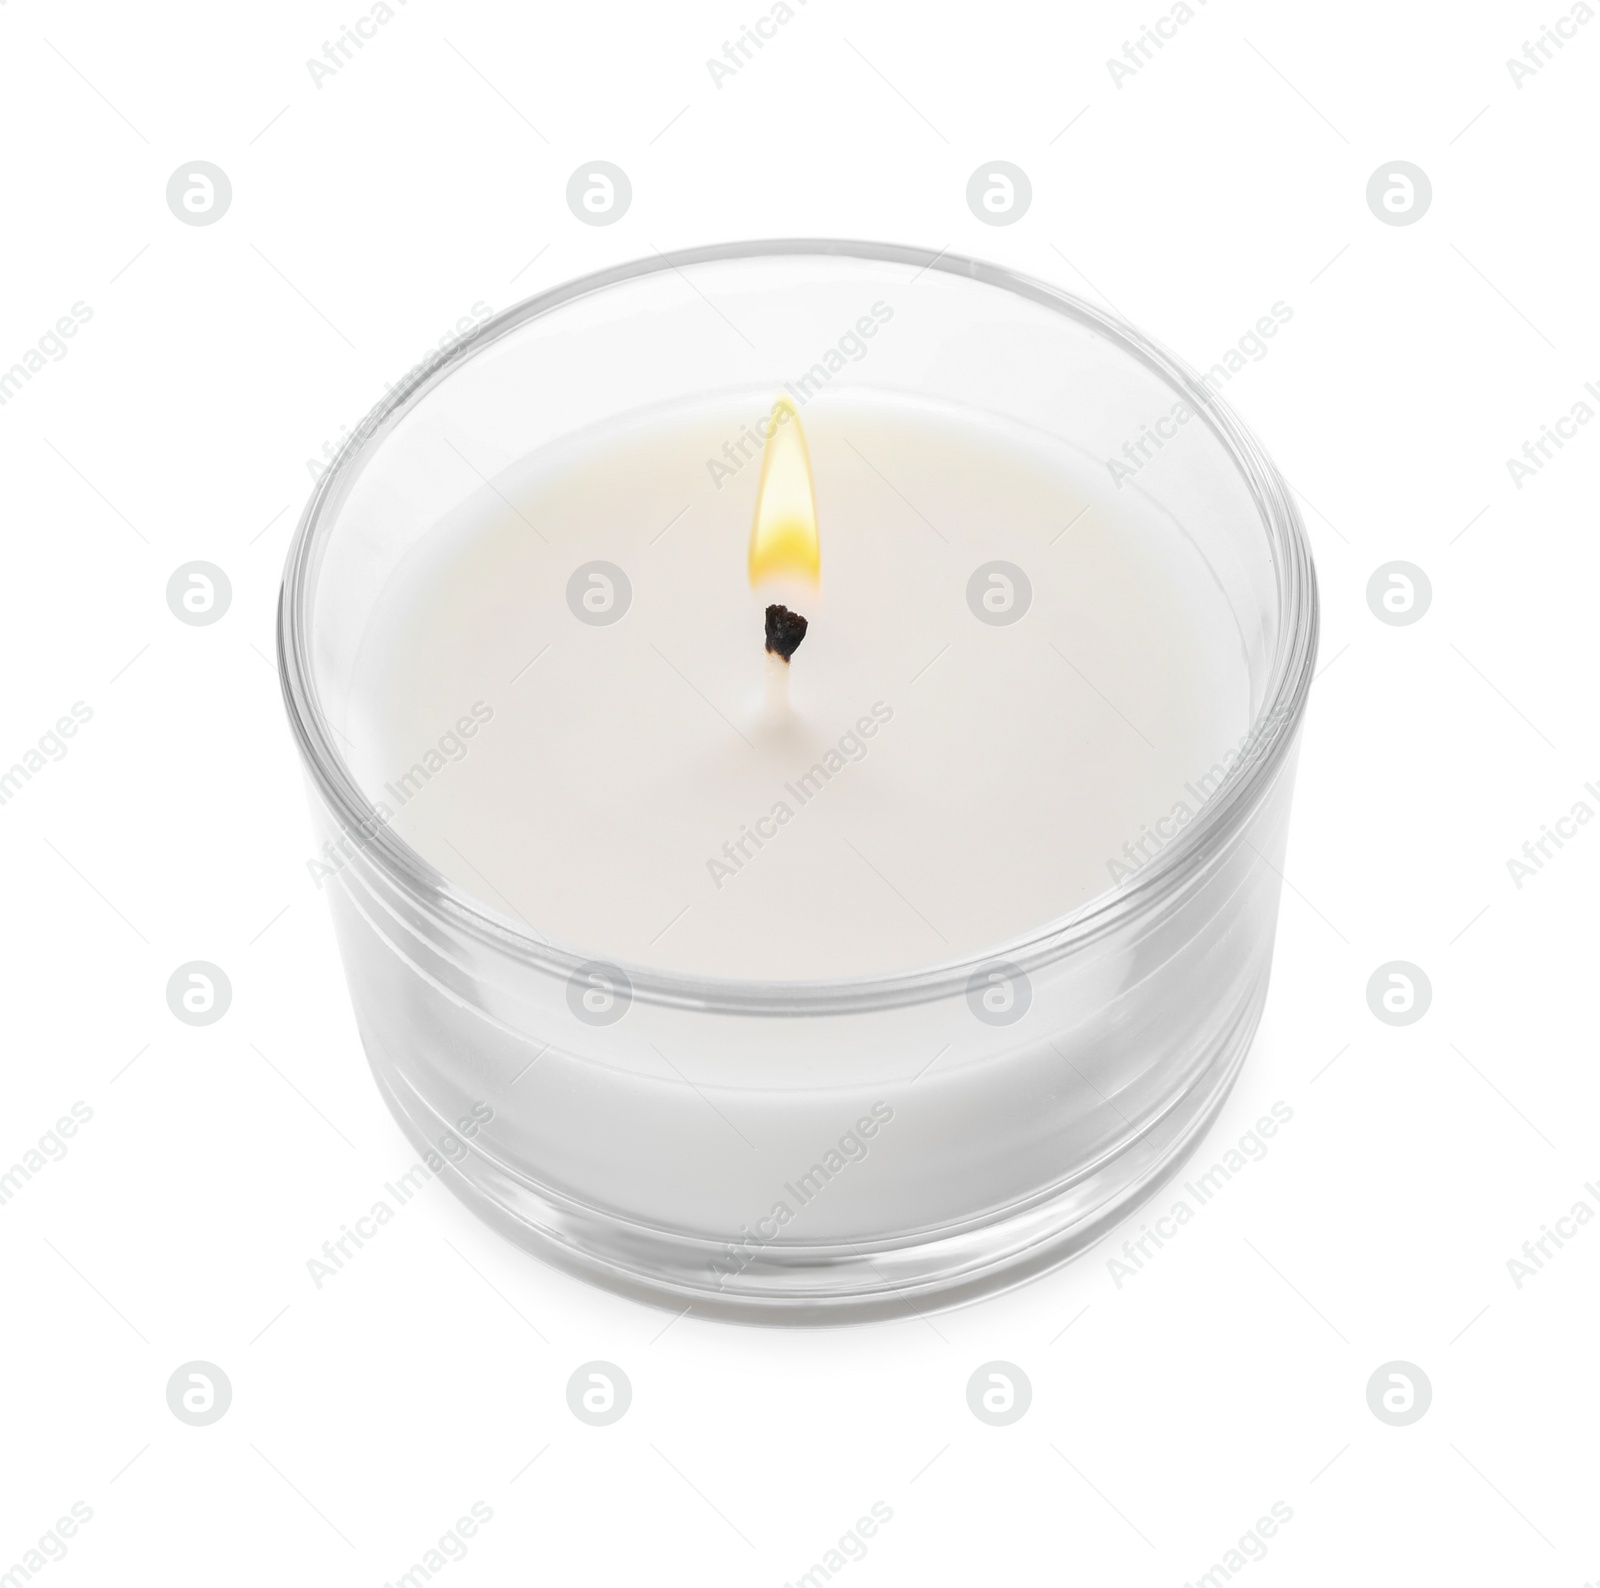 Photo of Burning small wax candle in glass holder isolated on white